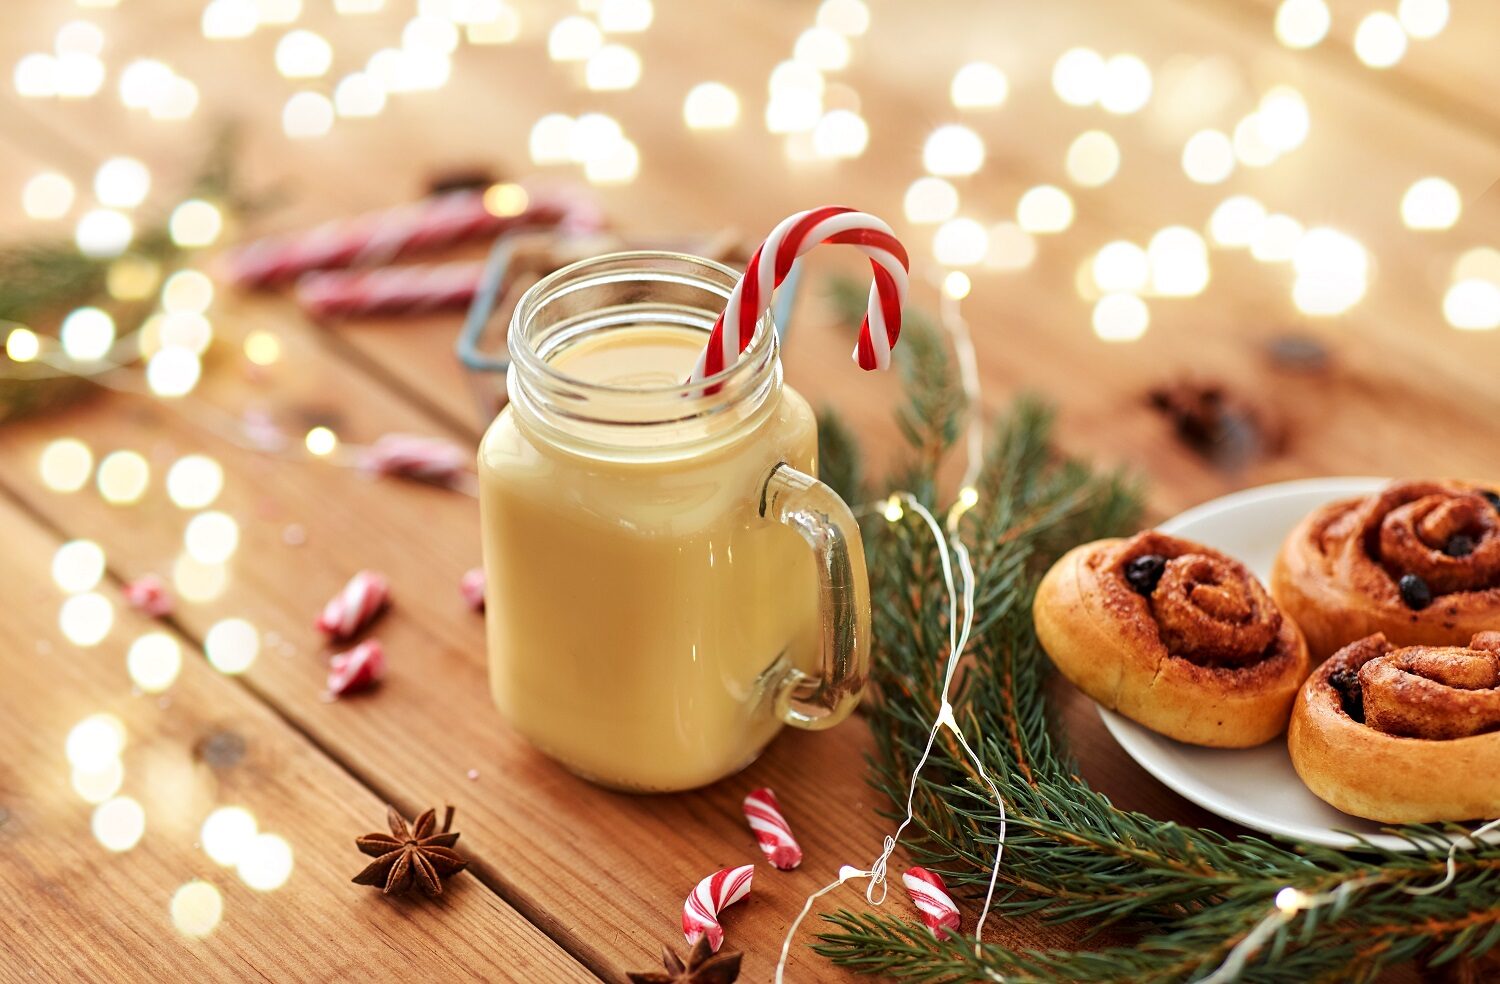 christmas and seasonal drinks concept - eggnog in glass mug with candy cane decoration, cinnamon buns, fir tree brunch and garland lights on wooden background